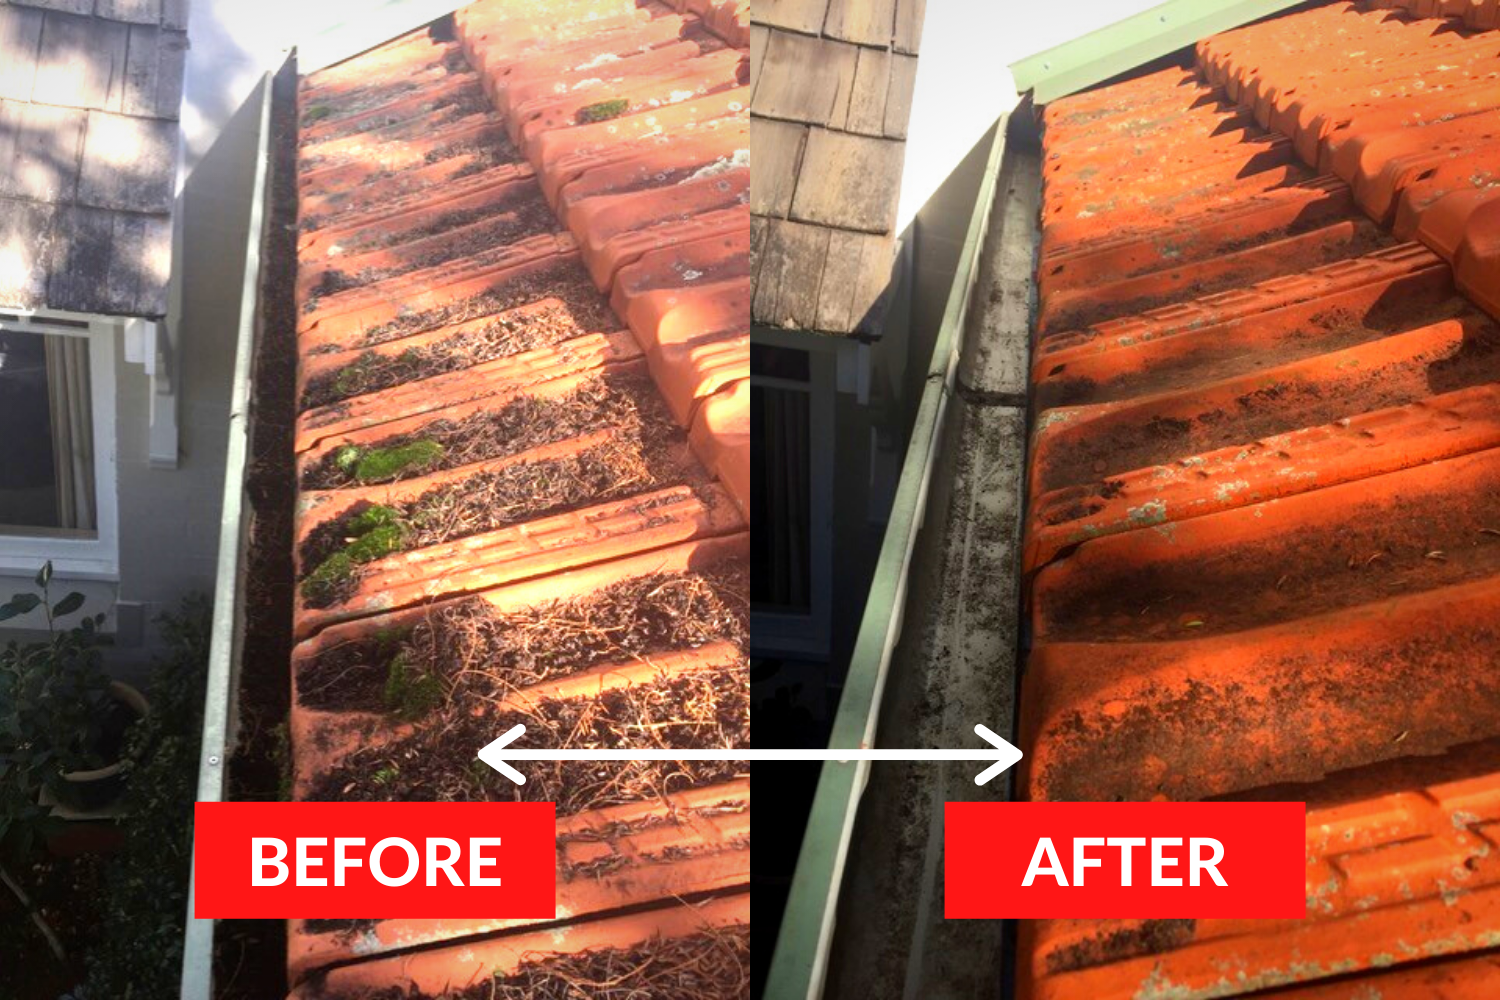 We would highly recommend Gutter-Vac Lower North Shore